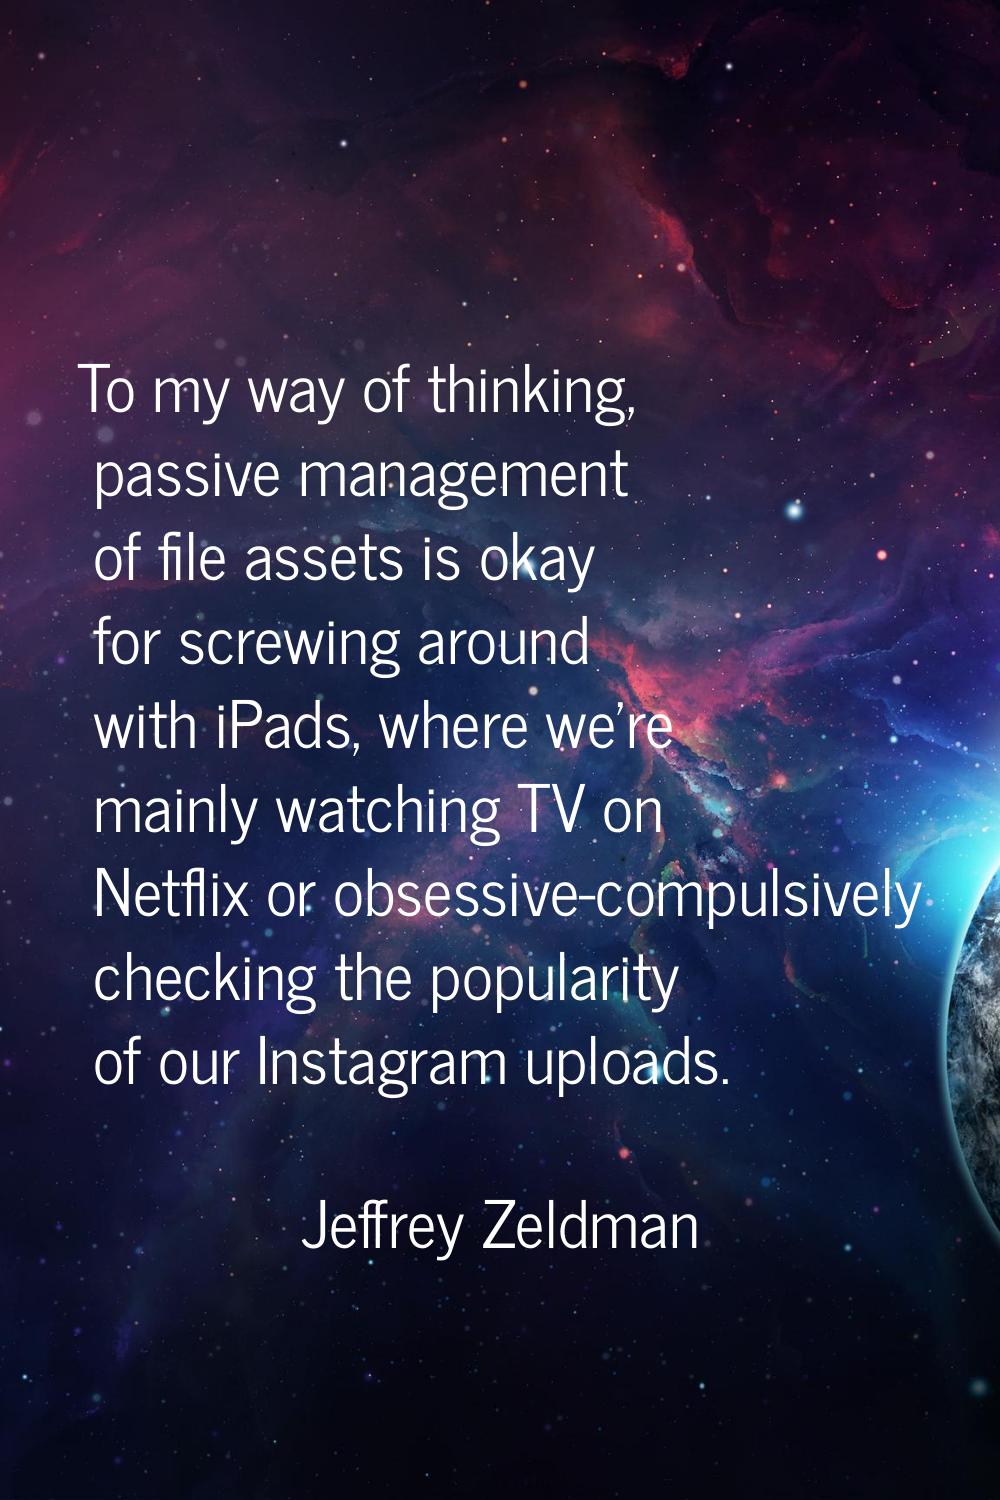 To my way of thinking, passive management of file assets is okay for screwing around with iPads, wh